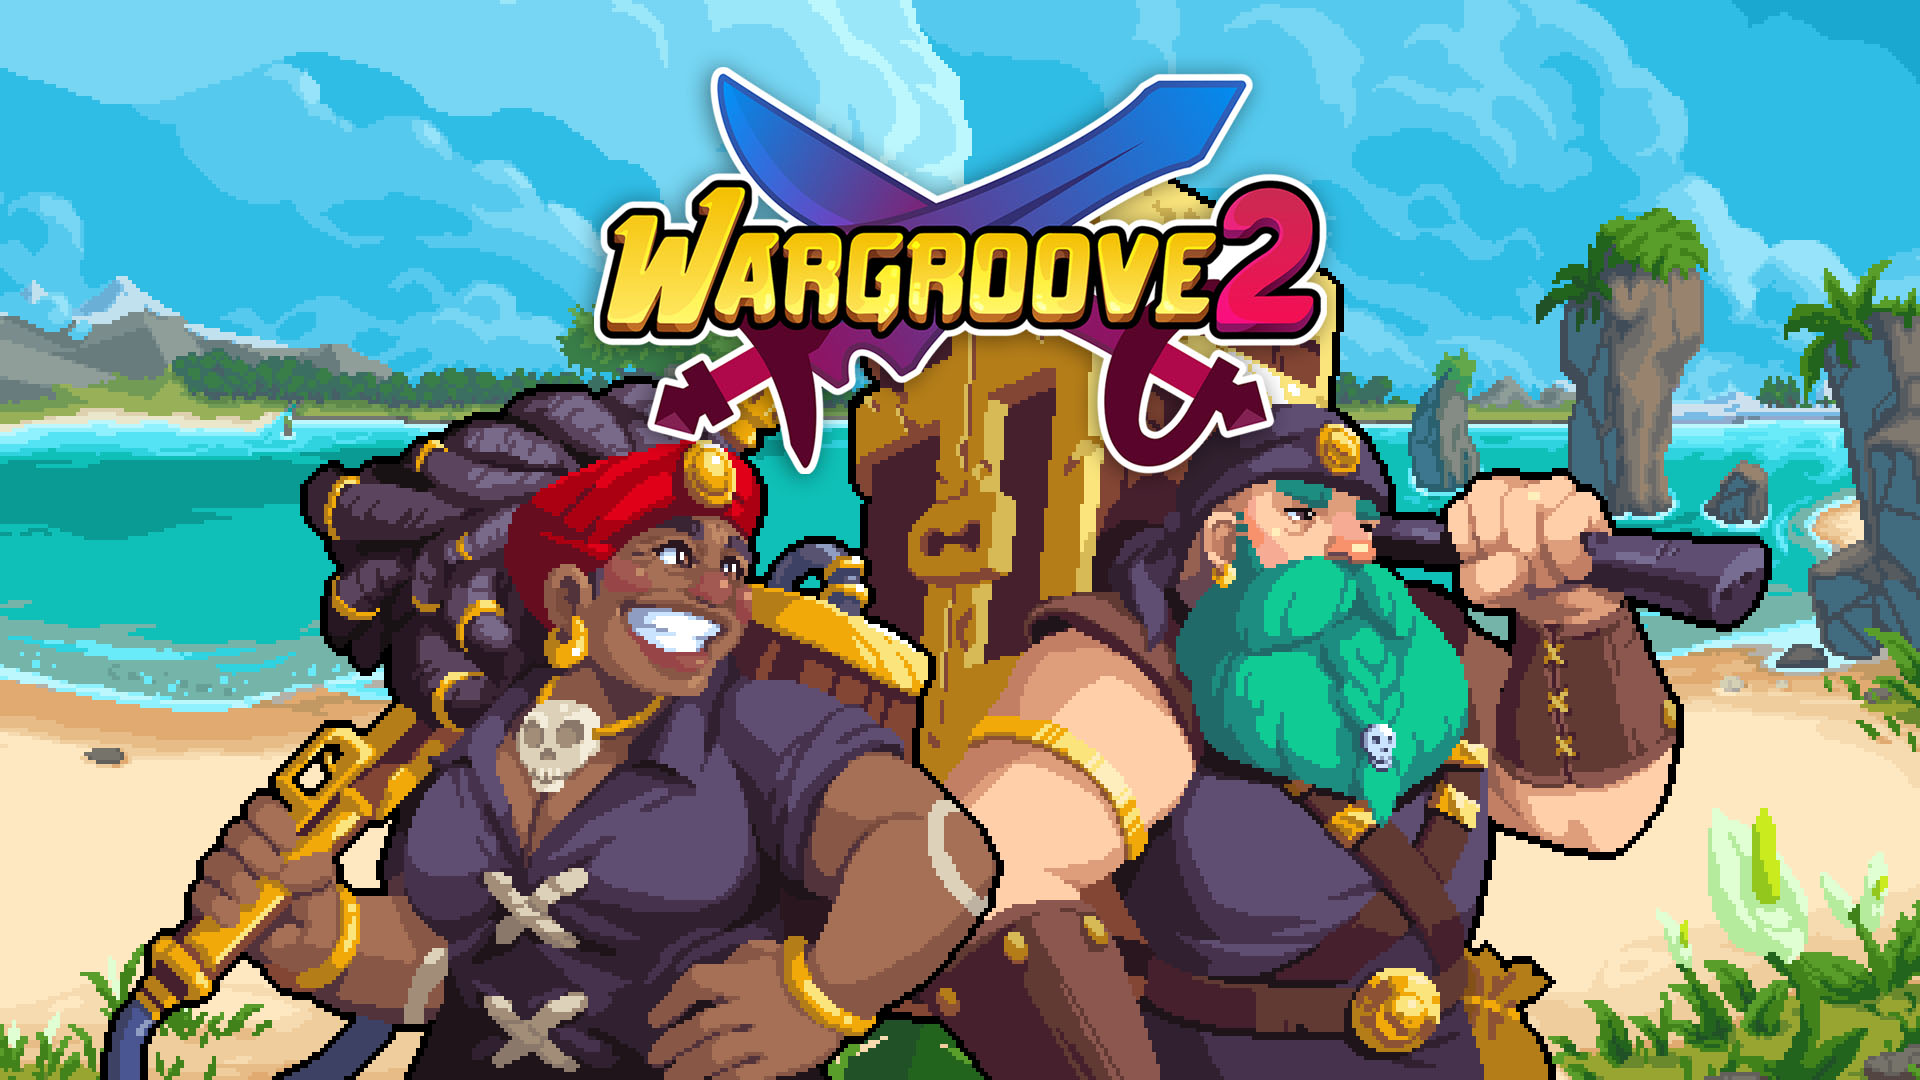 Turn-based strategy sequel Wargroove 2 announced